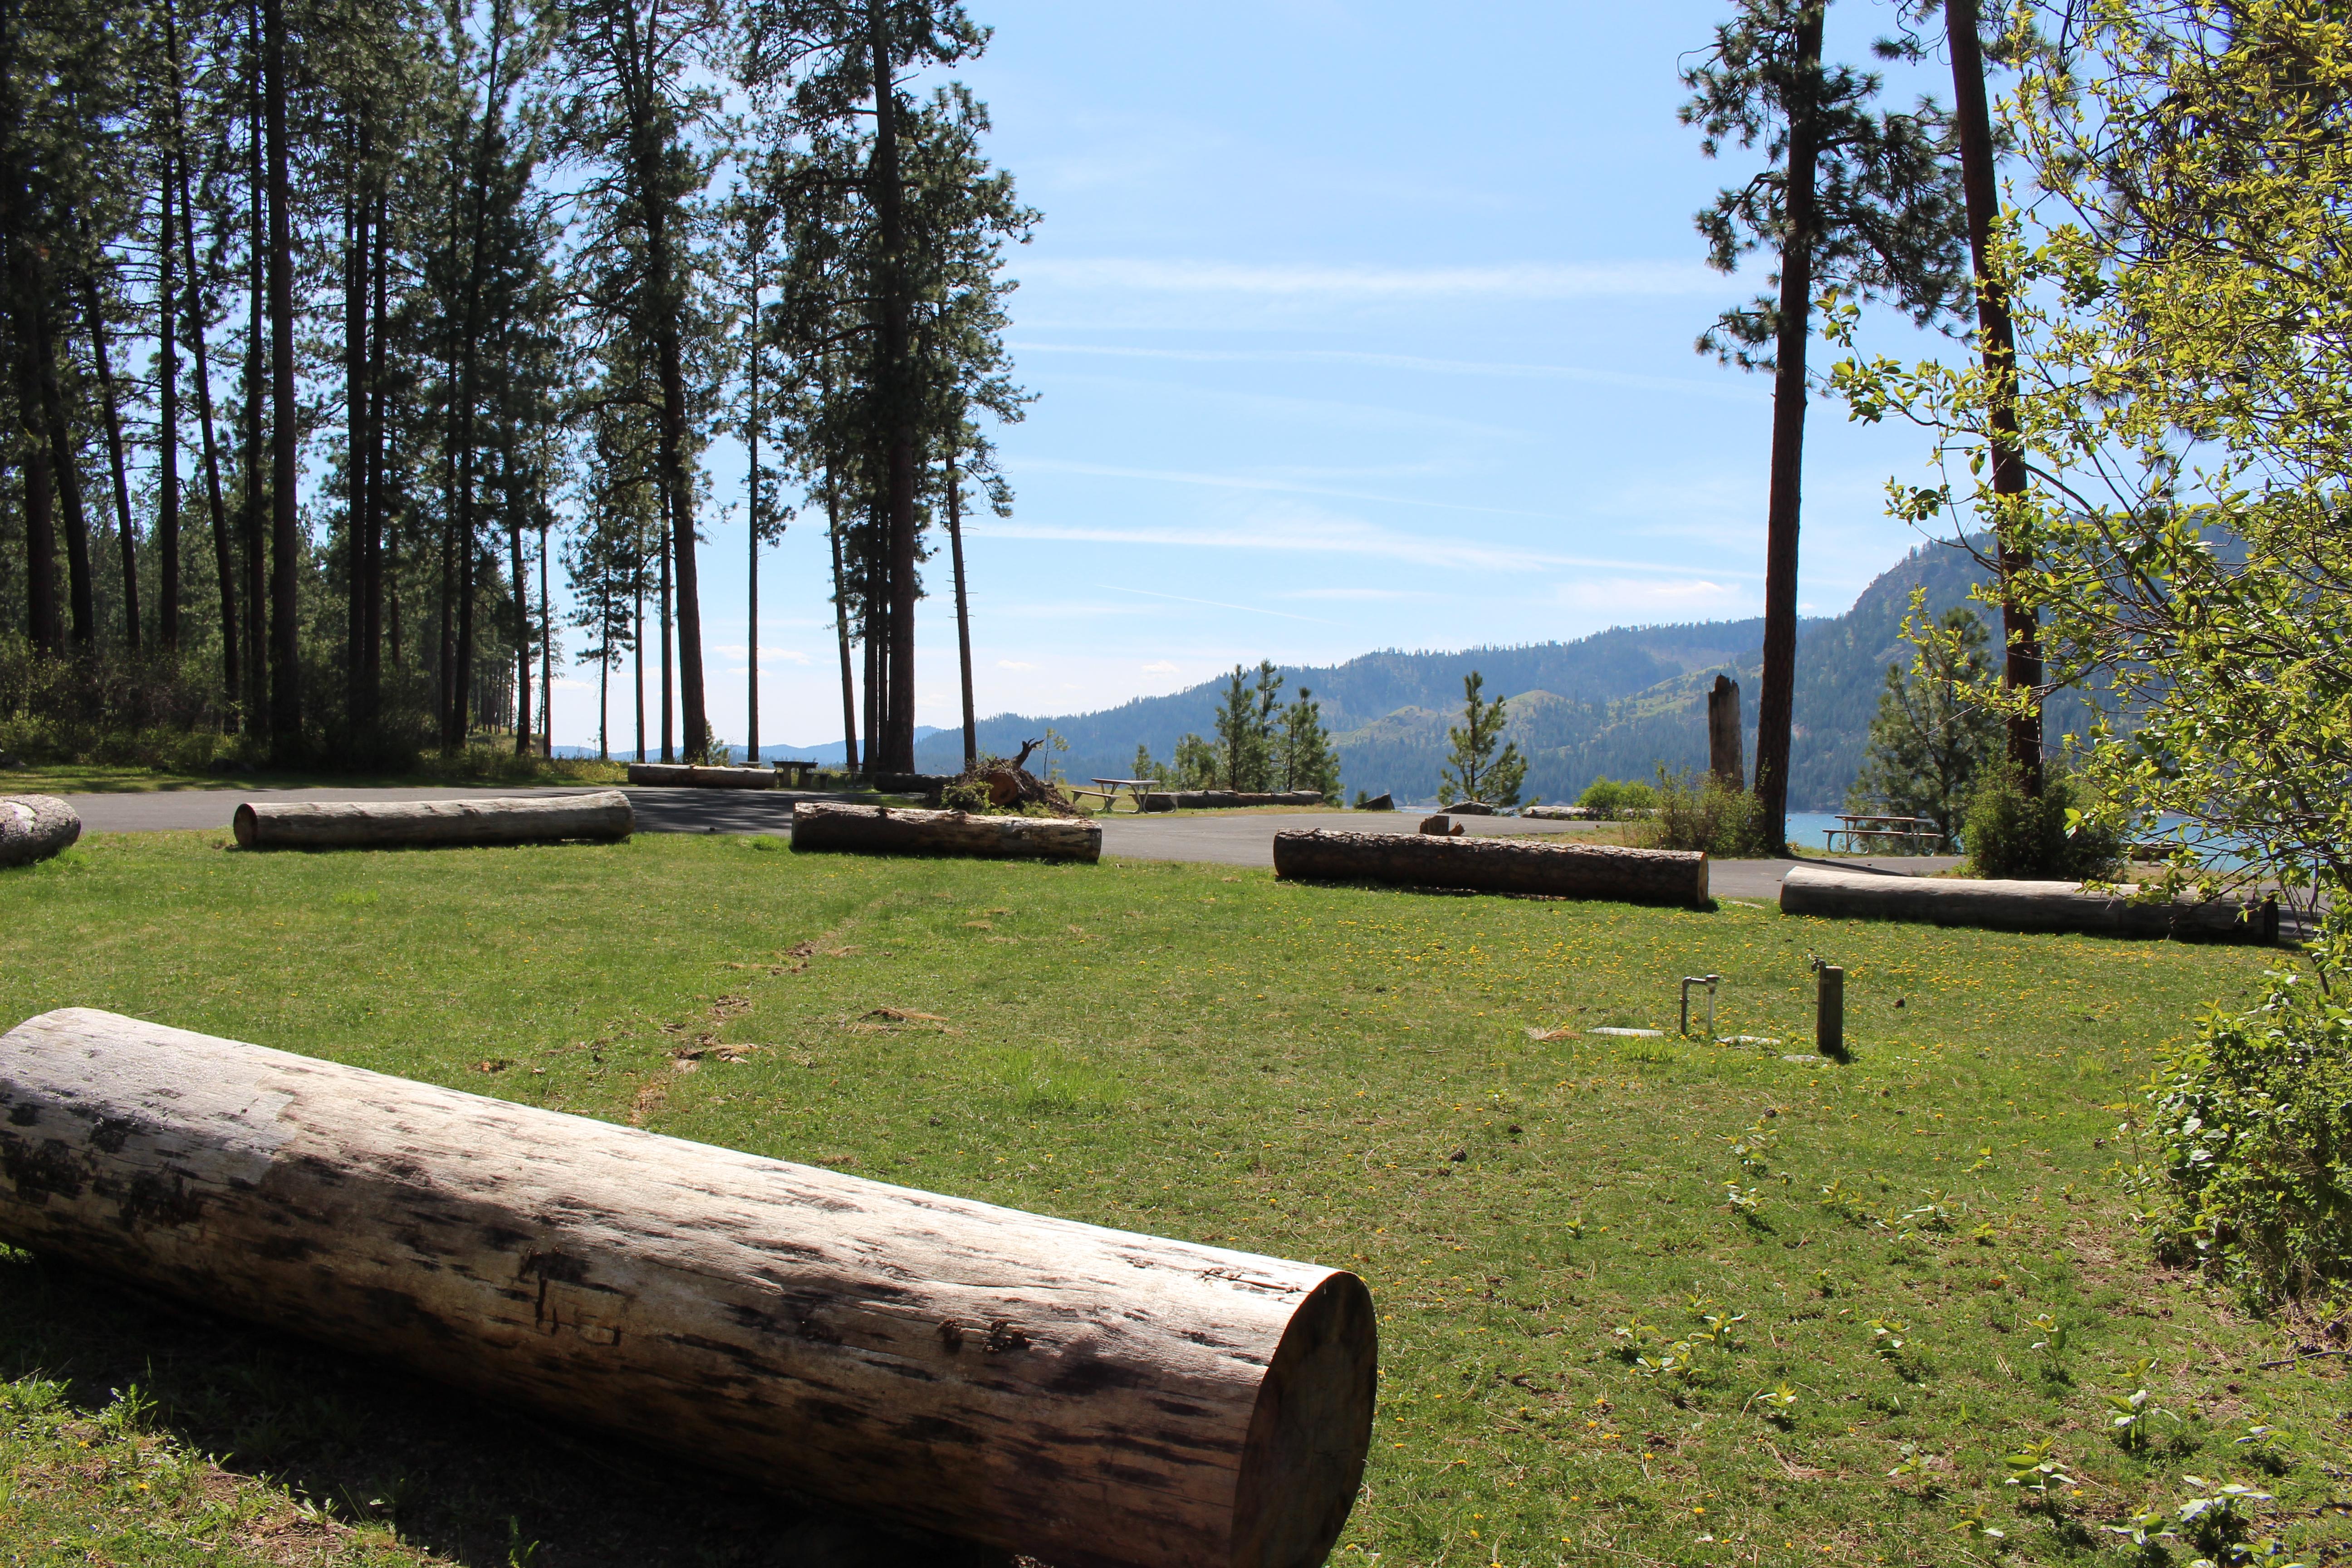 Log parking bumpers are lined up along the grassy edge of Hunters Group Site with tall pines beyond.